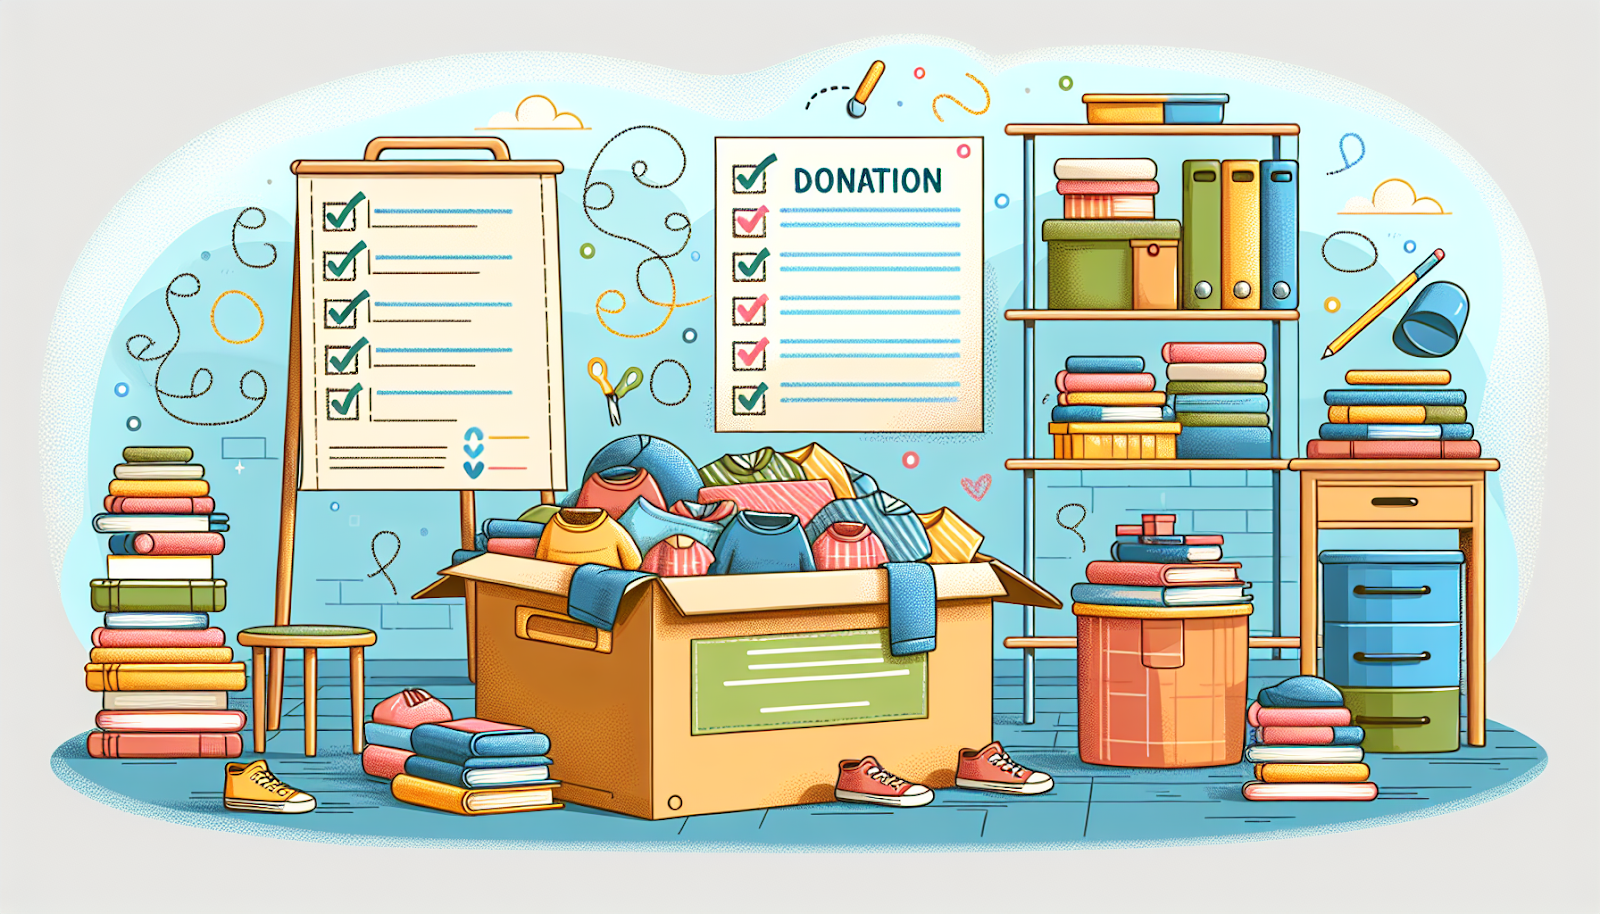 guidelines for material donation including reusable condition and organization